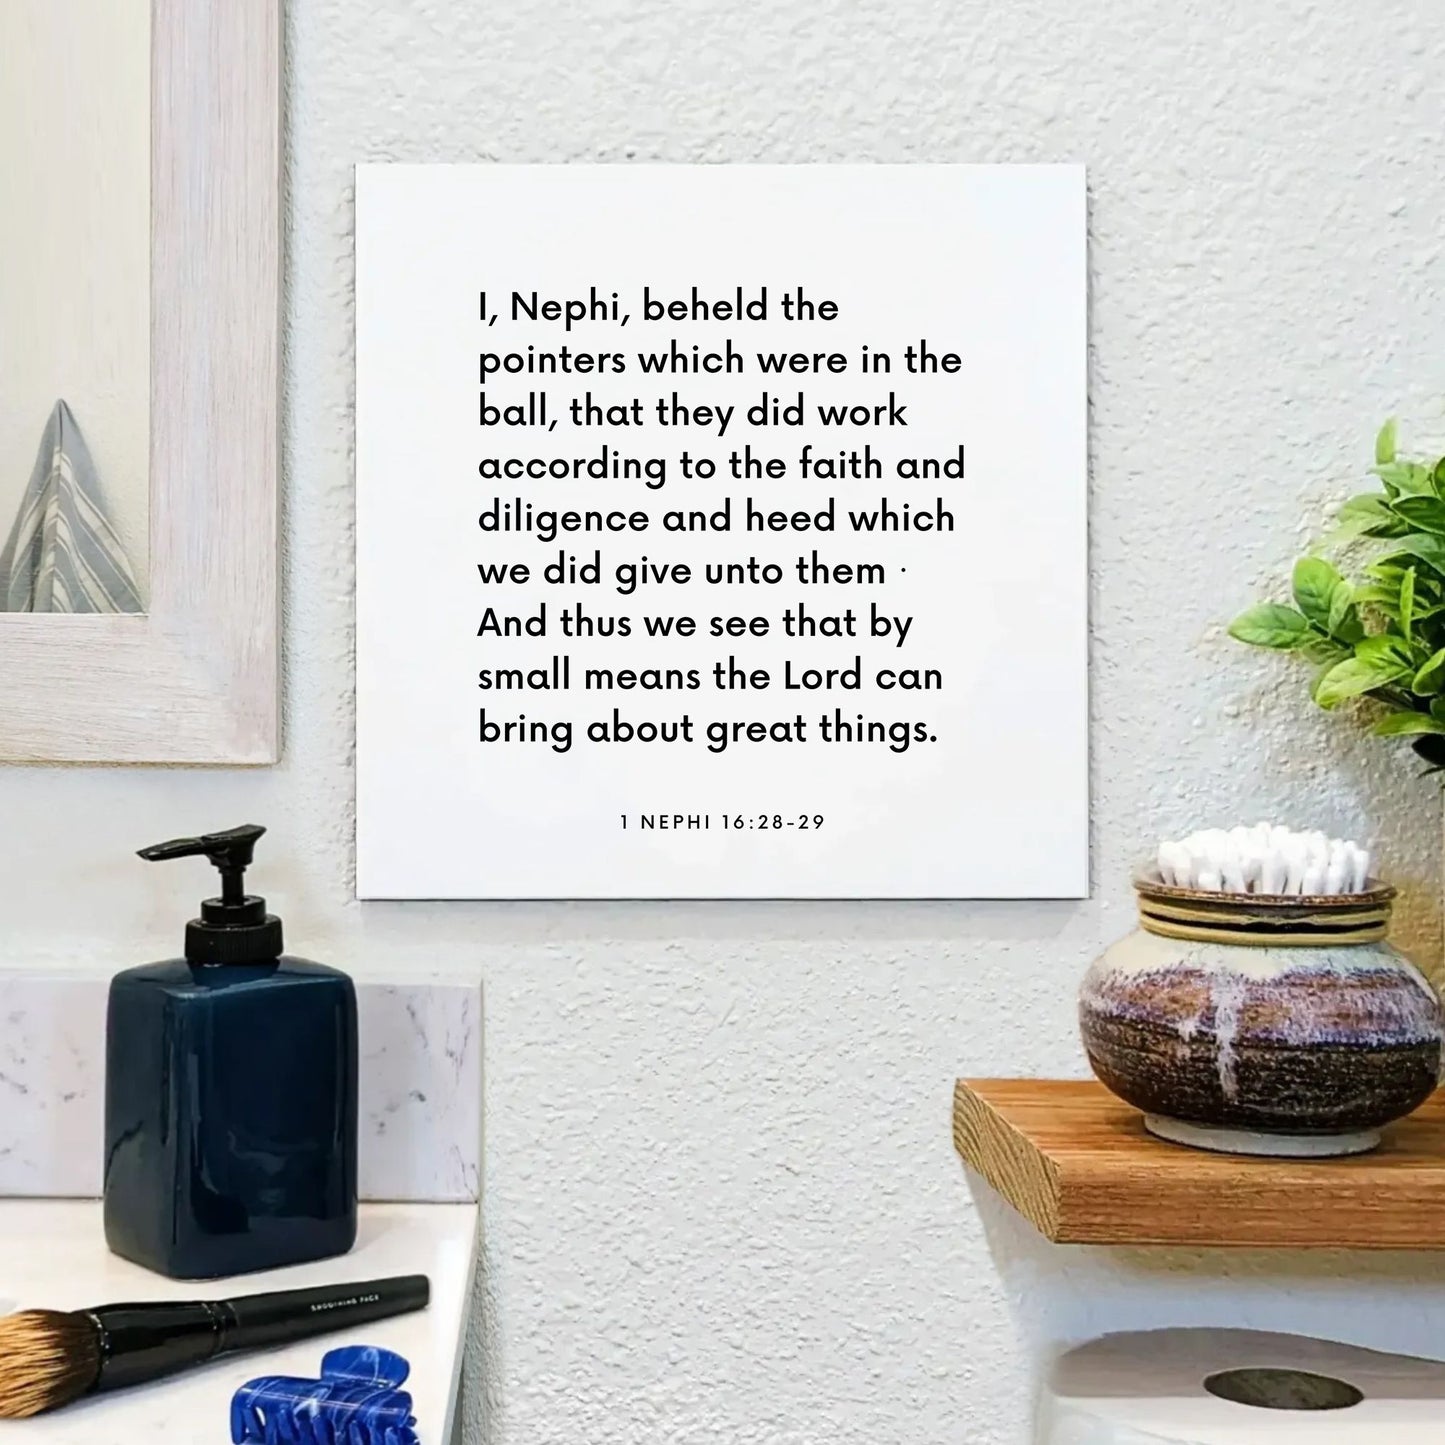 Bathroom mouting of the scripture tile for 1 Nephi 16:28-29 - "By small means the Lord can bring about great things"